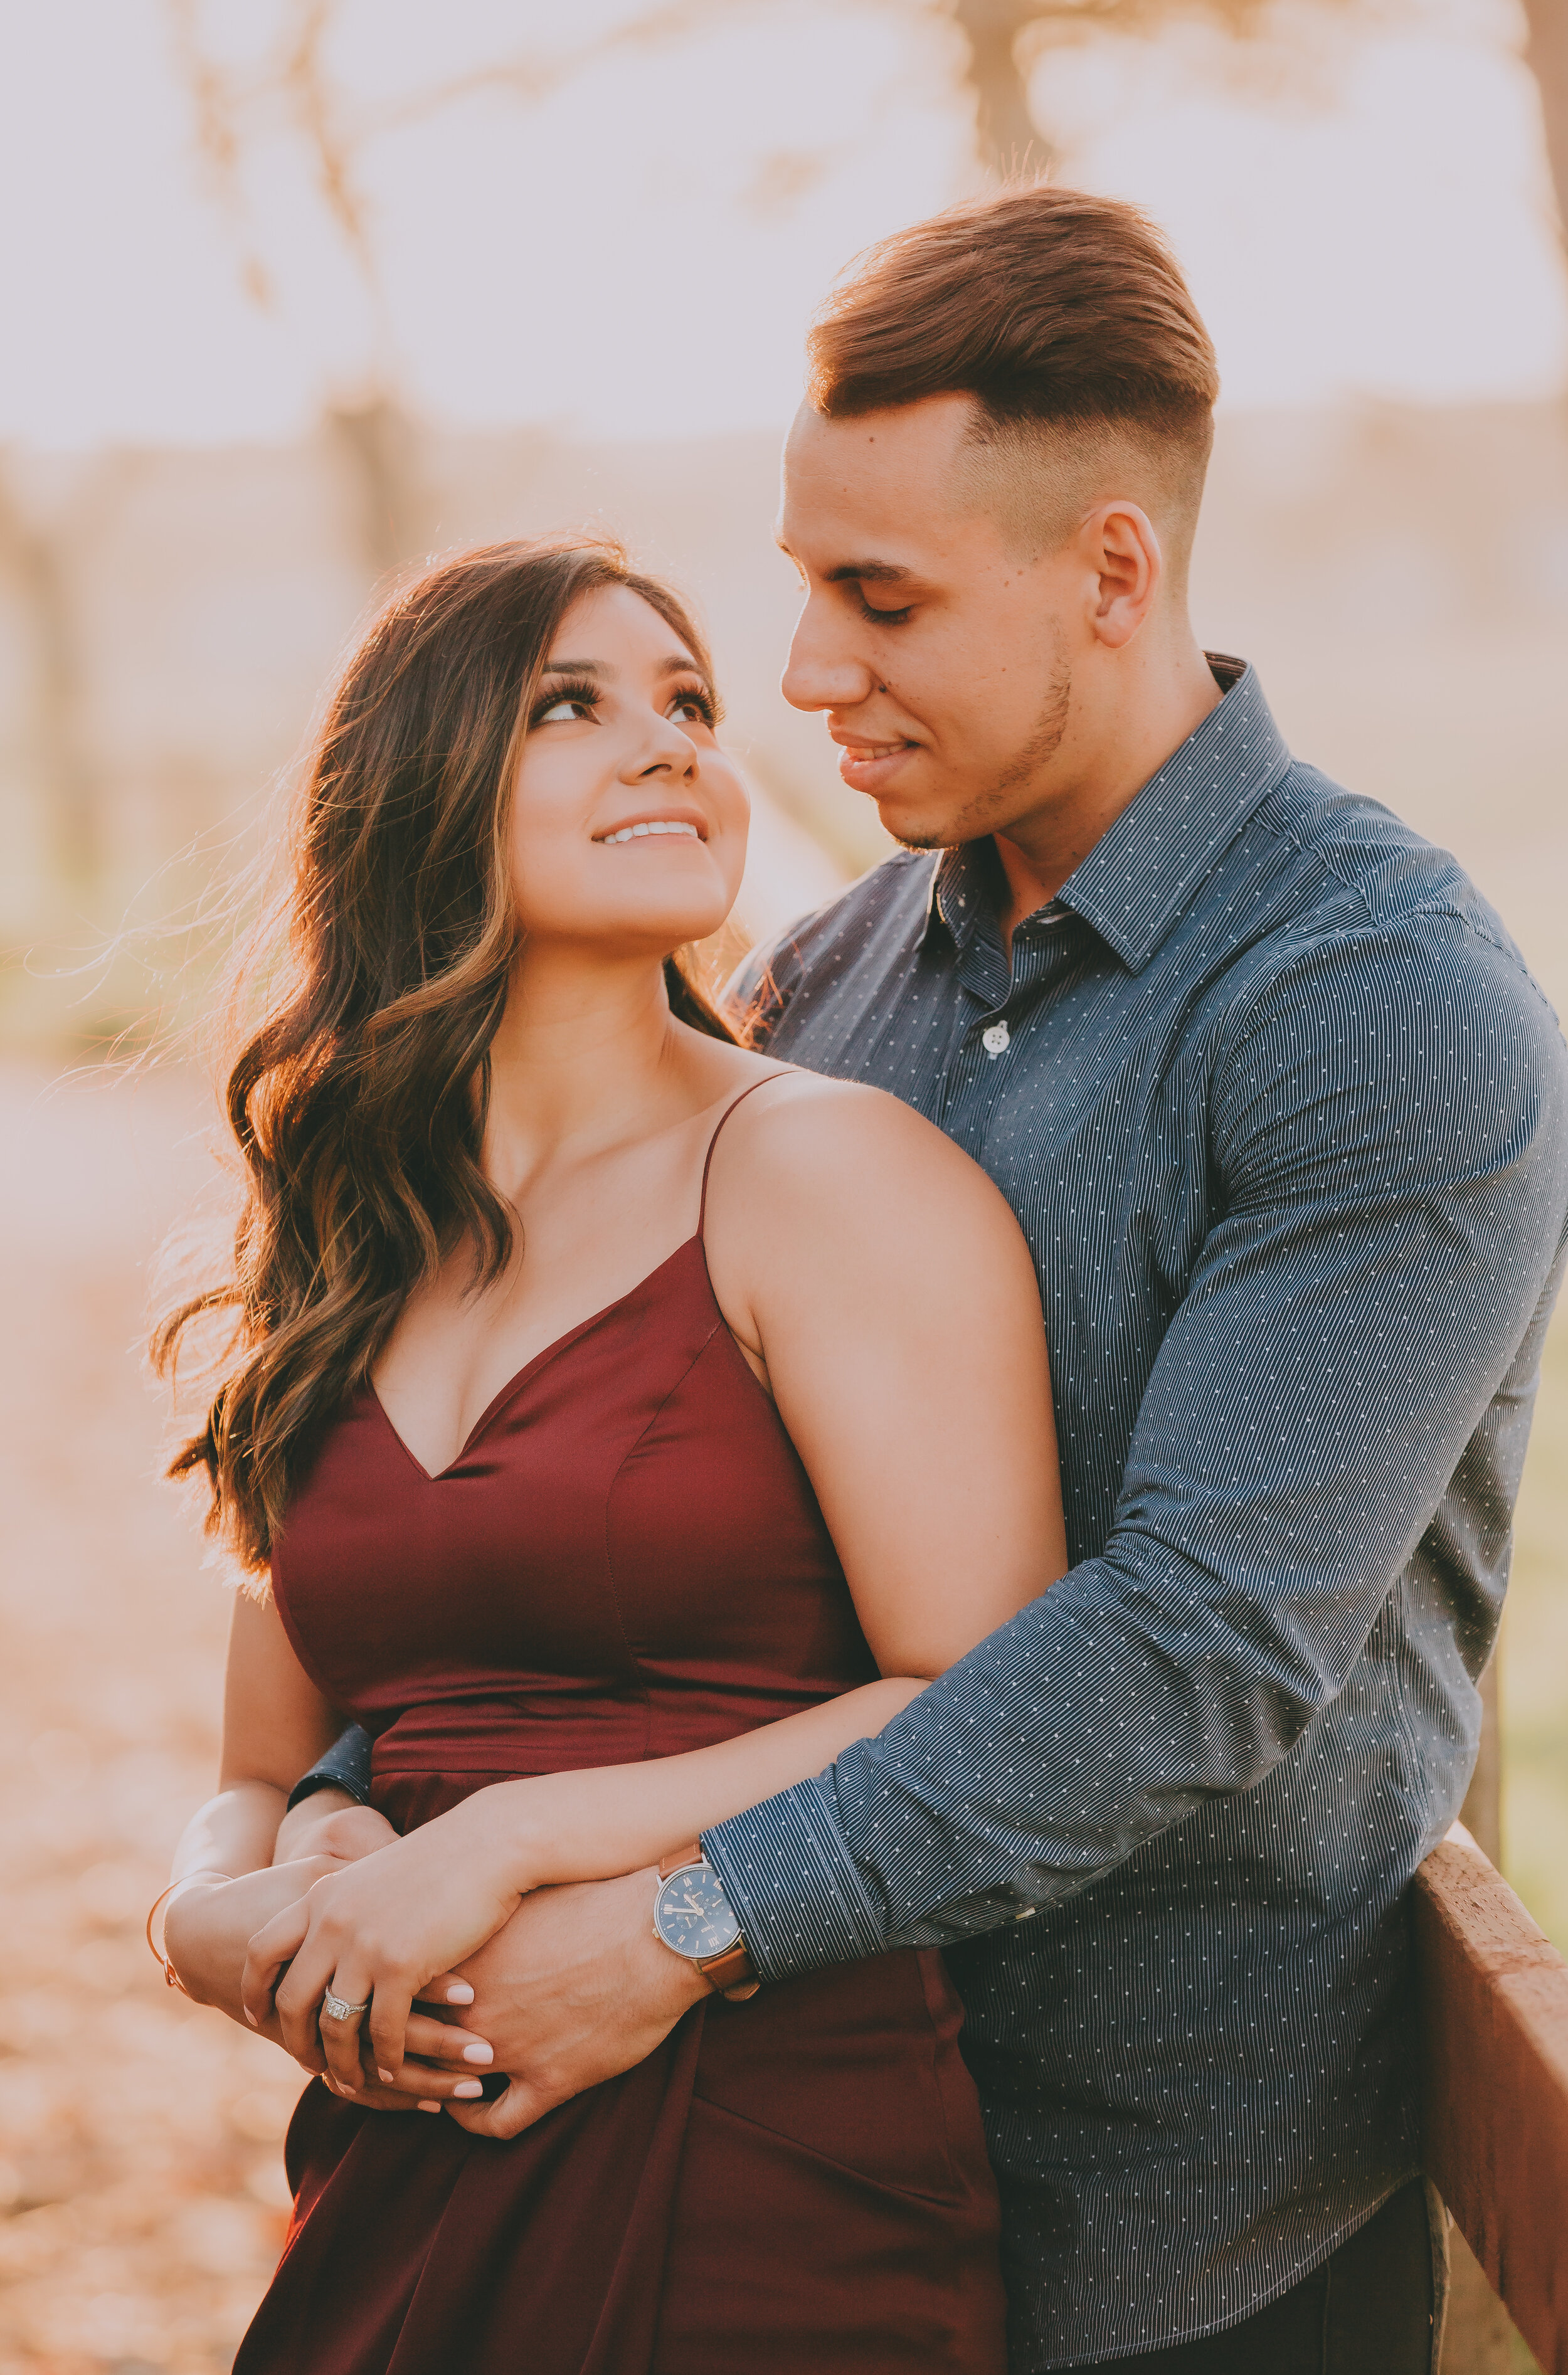 Fresno Engagament Photos - The Clausen Gallery - Samantha and Jesus-26.jpg